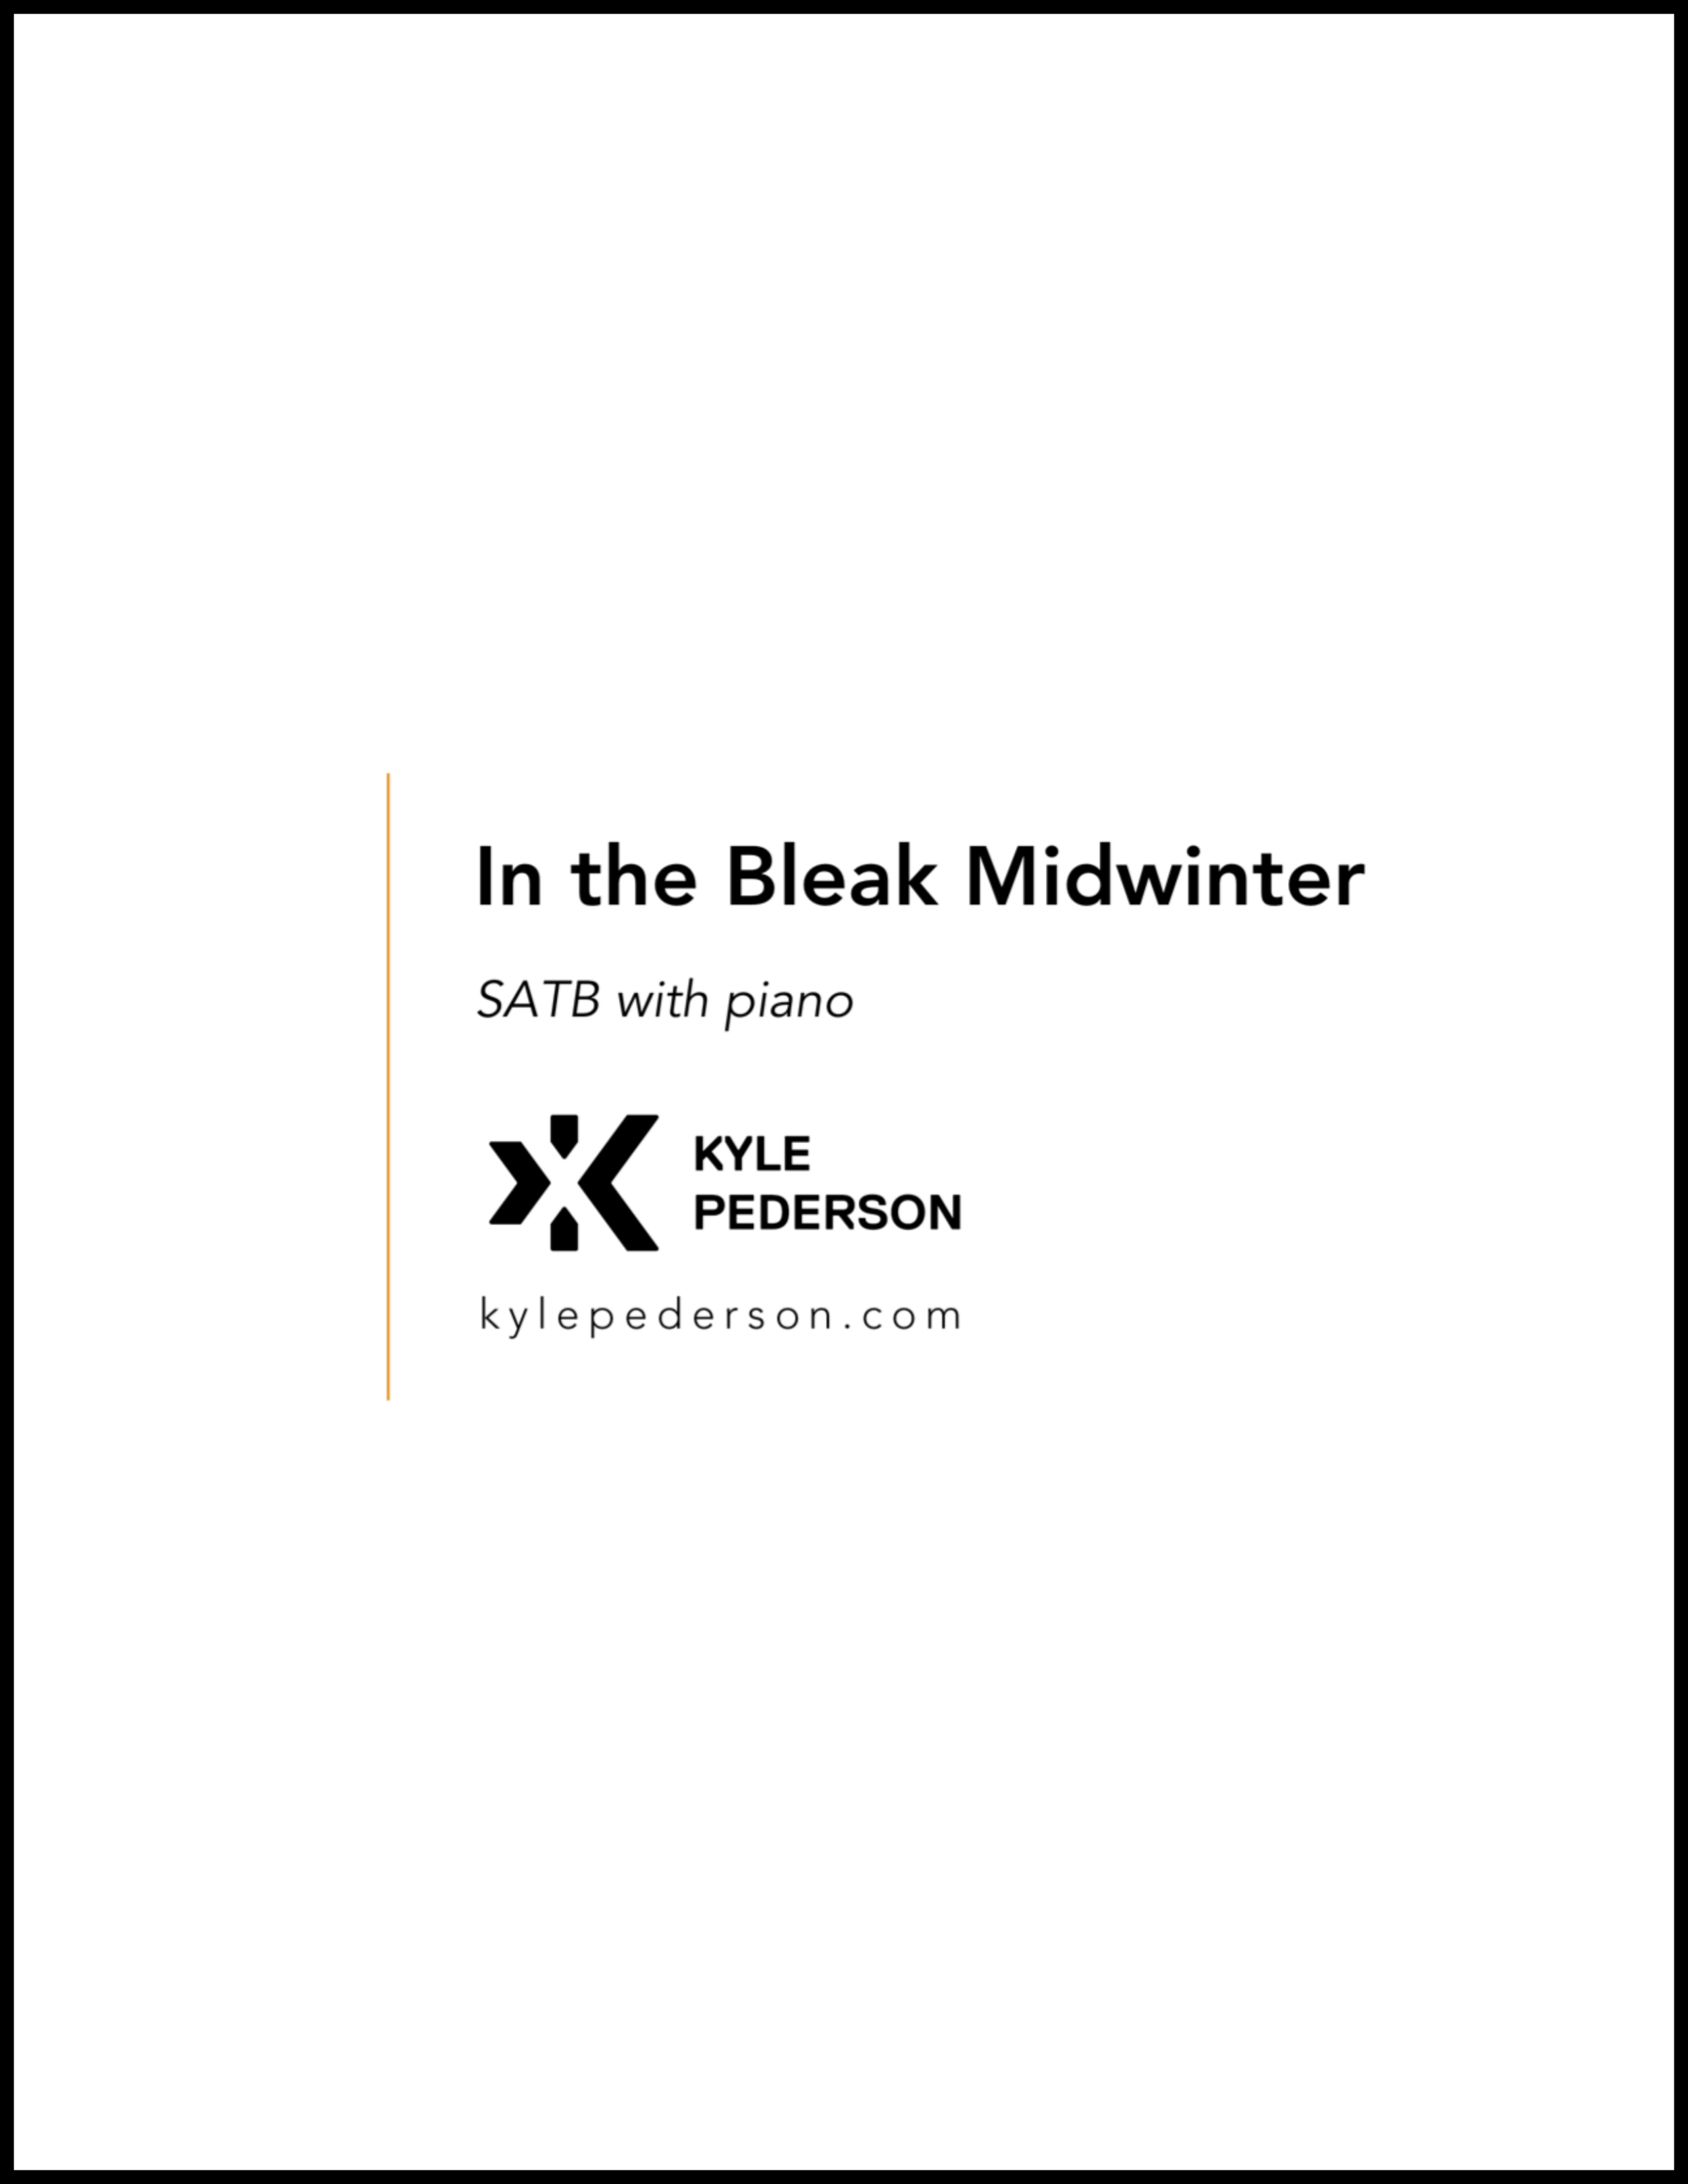 The meaning midwinter in bleak In the